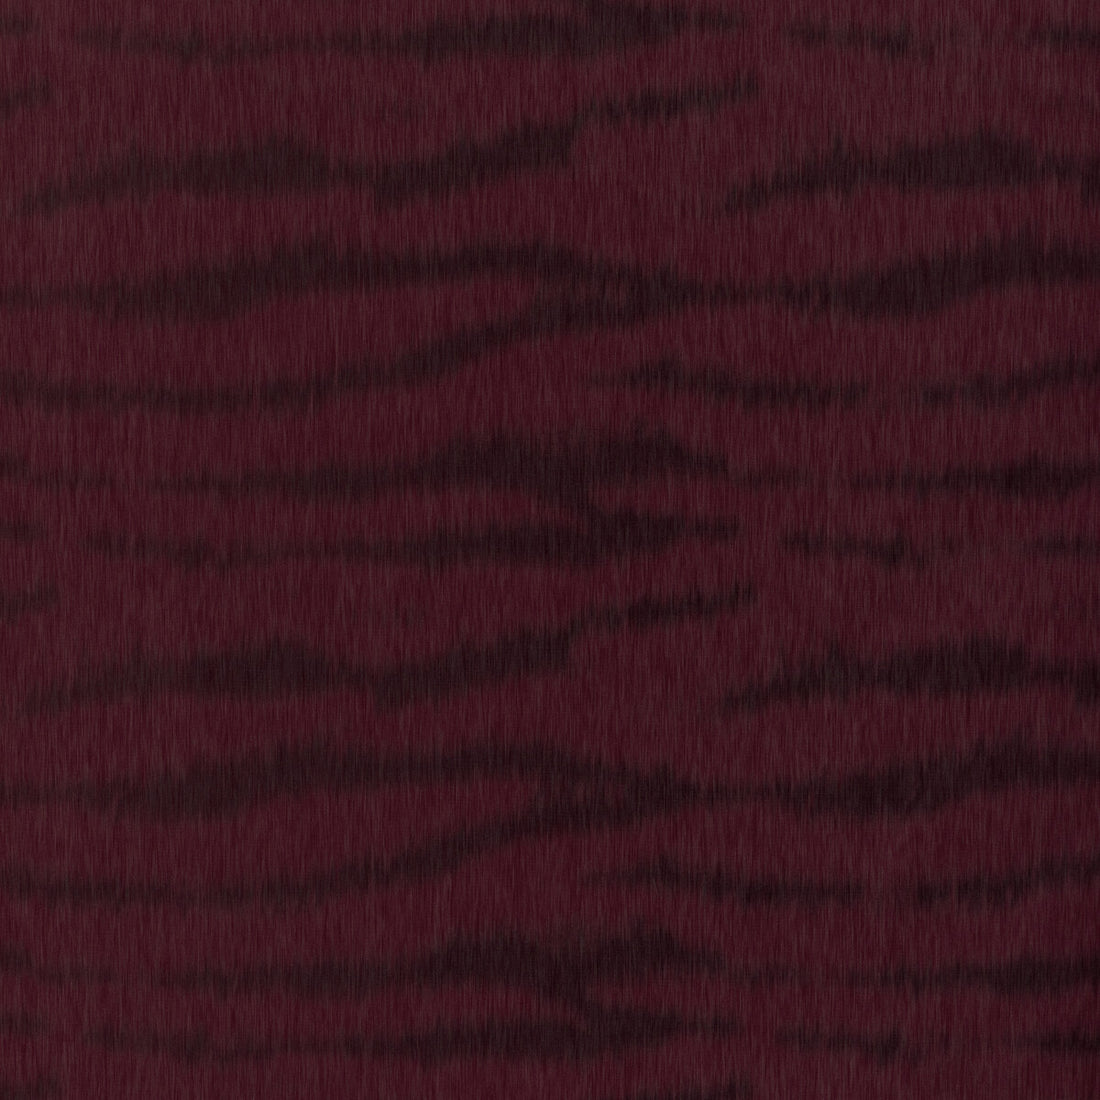 Tigre Warp Print fabric in plum color - pattern 8023137.10.0 - by Brunschwig &amp; Fils in the Celeste collection